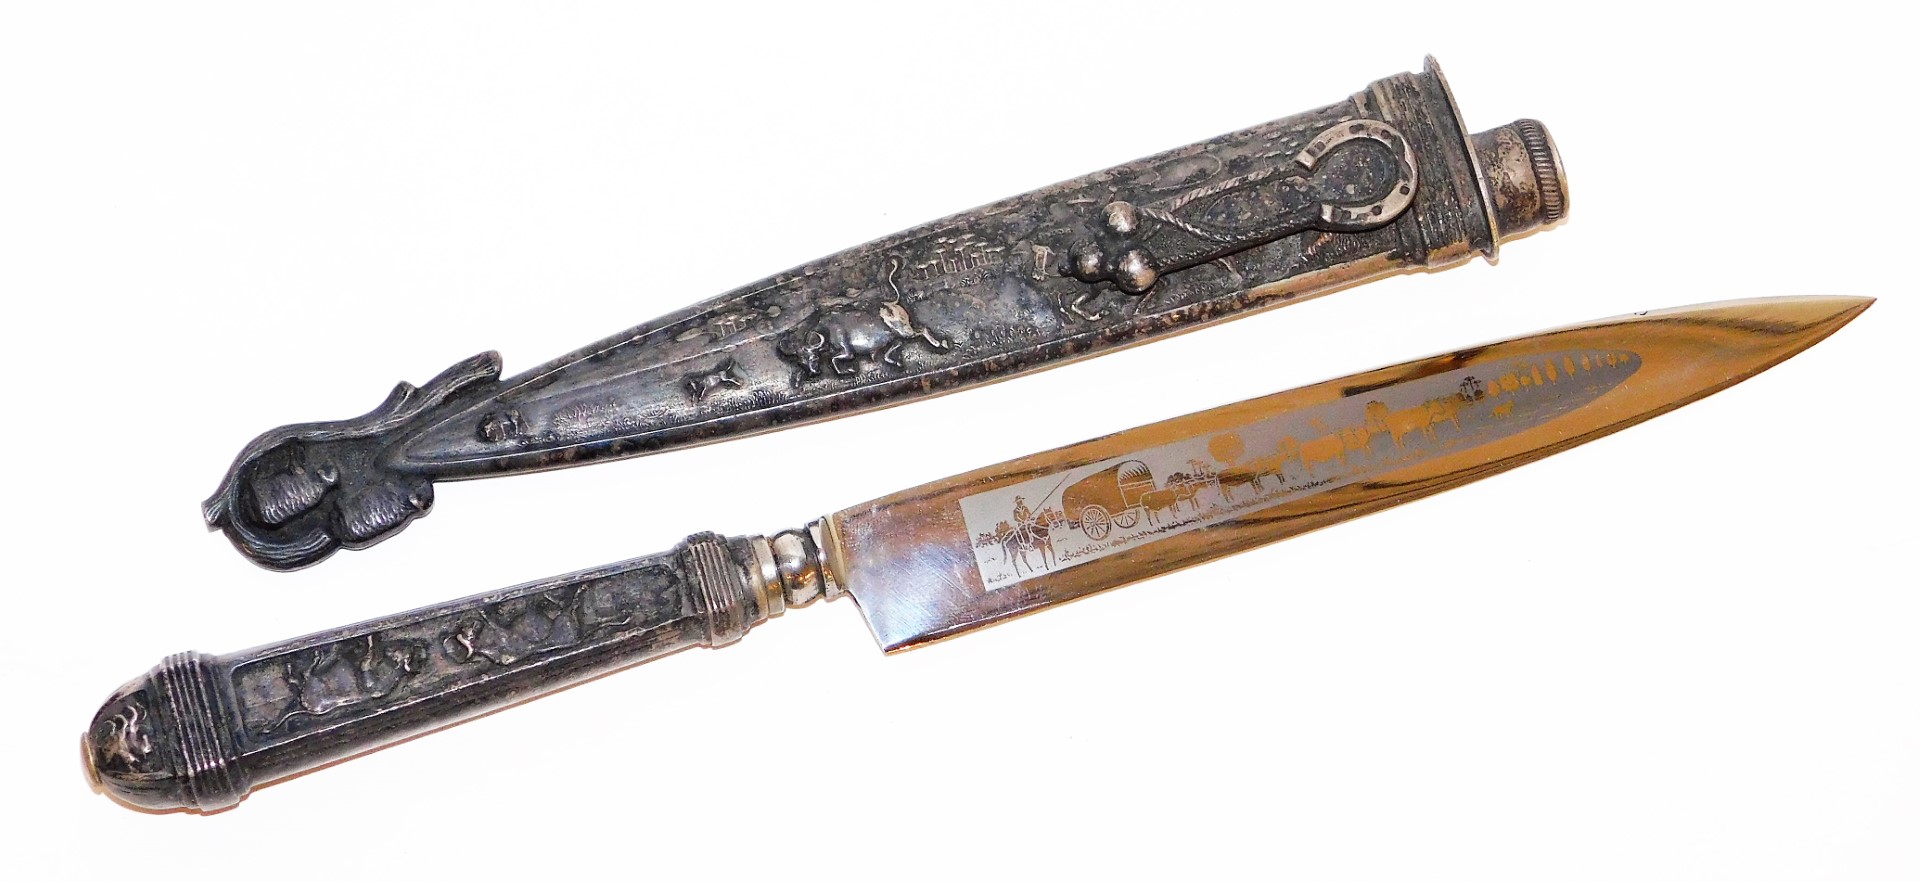 An Inox hunting knife, in a silver plated scabbard, heavily embossed with cattle scenes, of cows, bu - Image 2 of 2